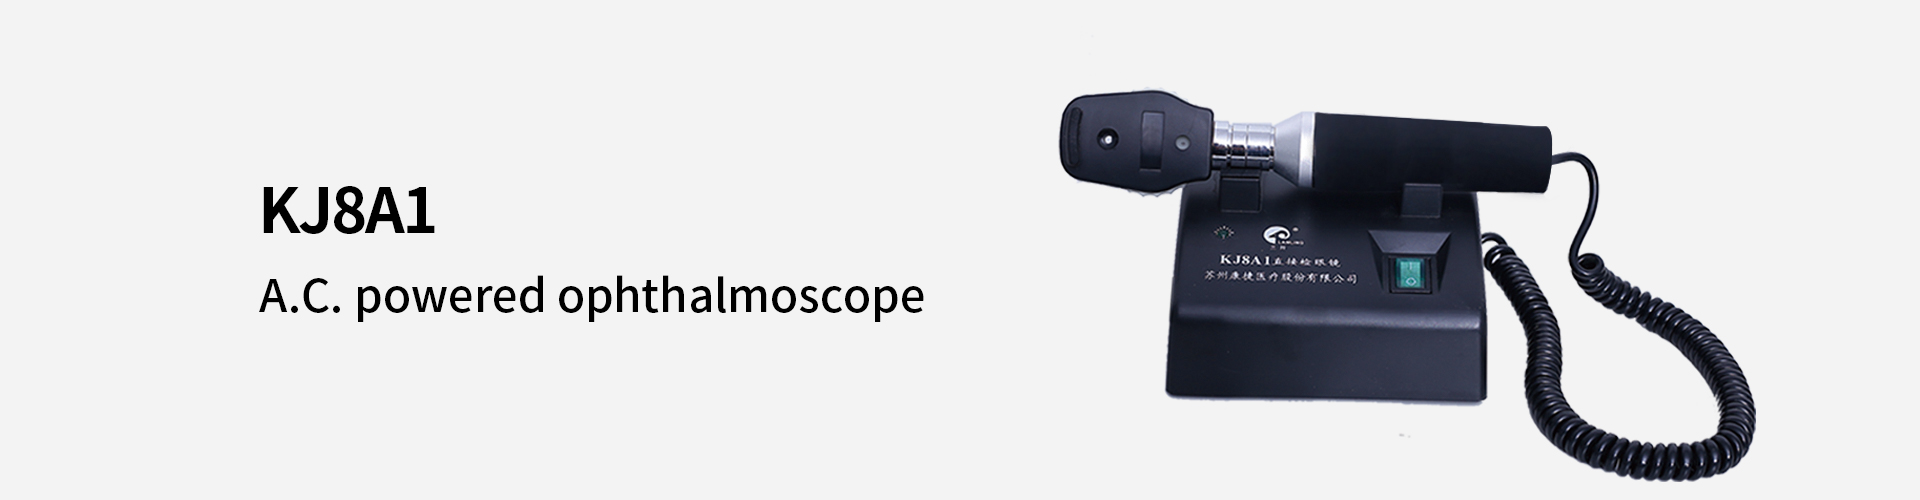 A.C. powered ophthalmoscope